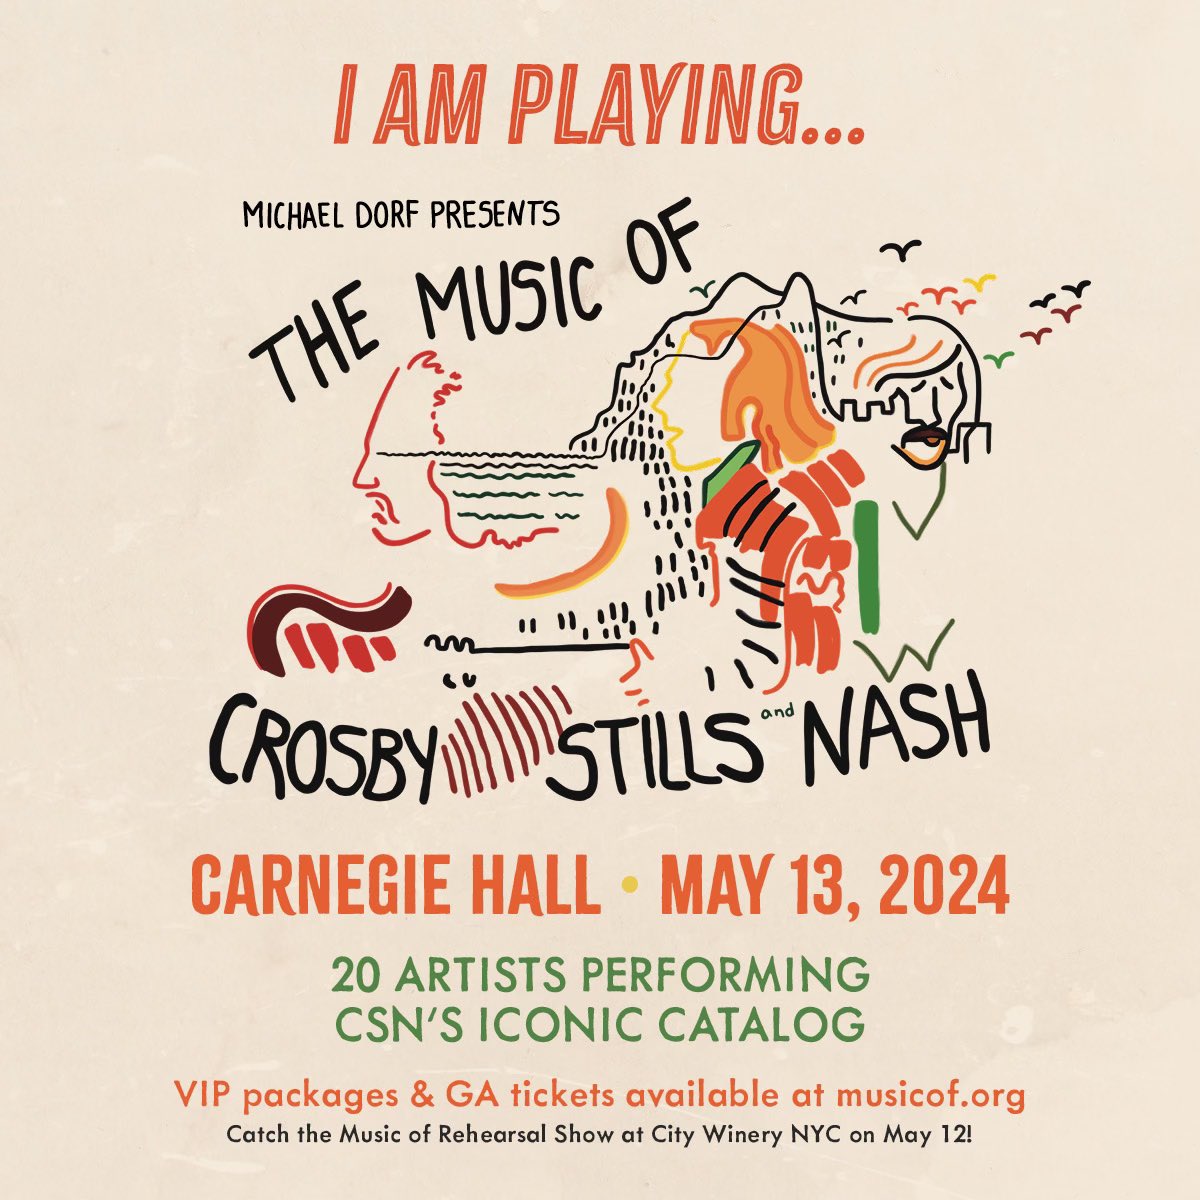 We’re absolutely thrilled to be performing at The Music of CSN at Carnegie Hall on May 13th! 100% of net proceeds support youth music and writing education programs. 📖 🎶 Love. Tickets at musicof.org